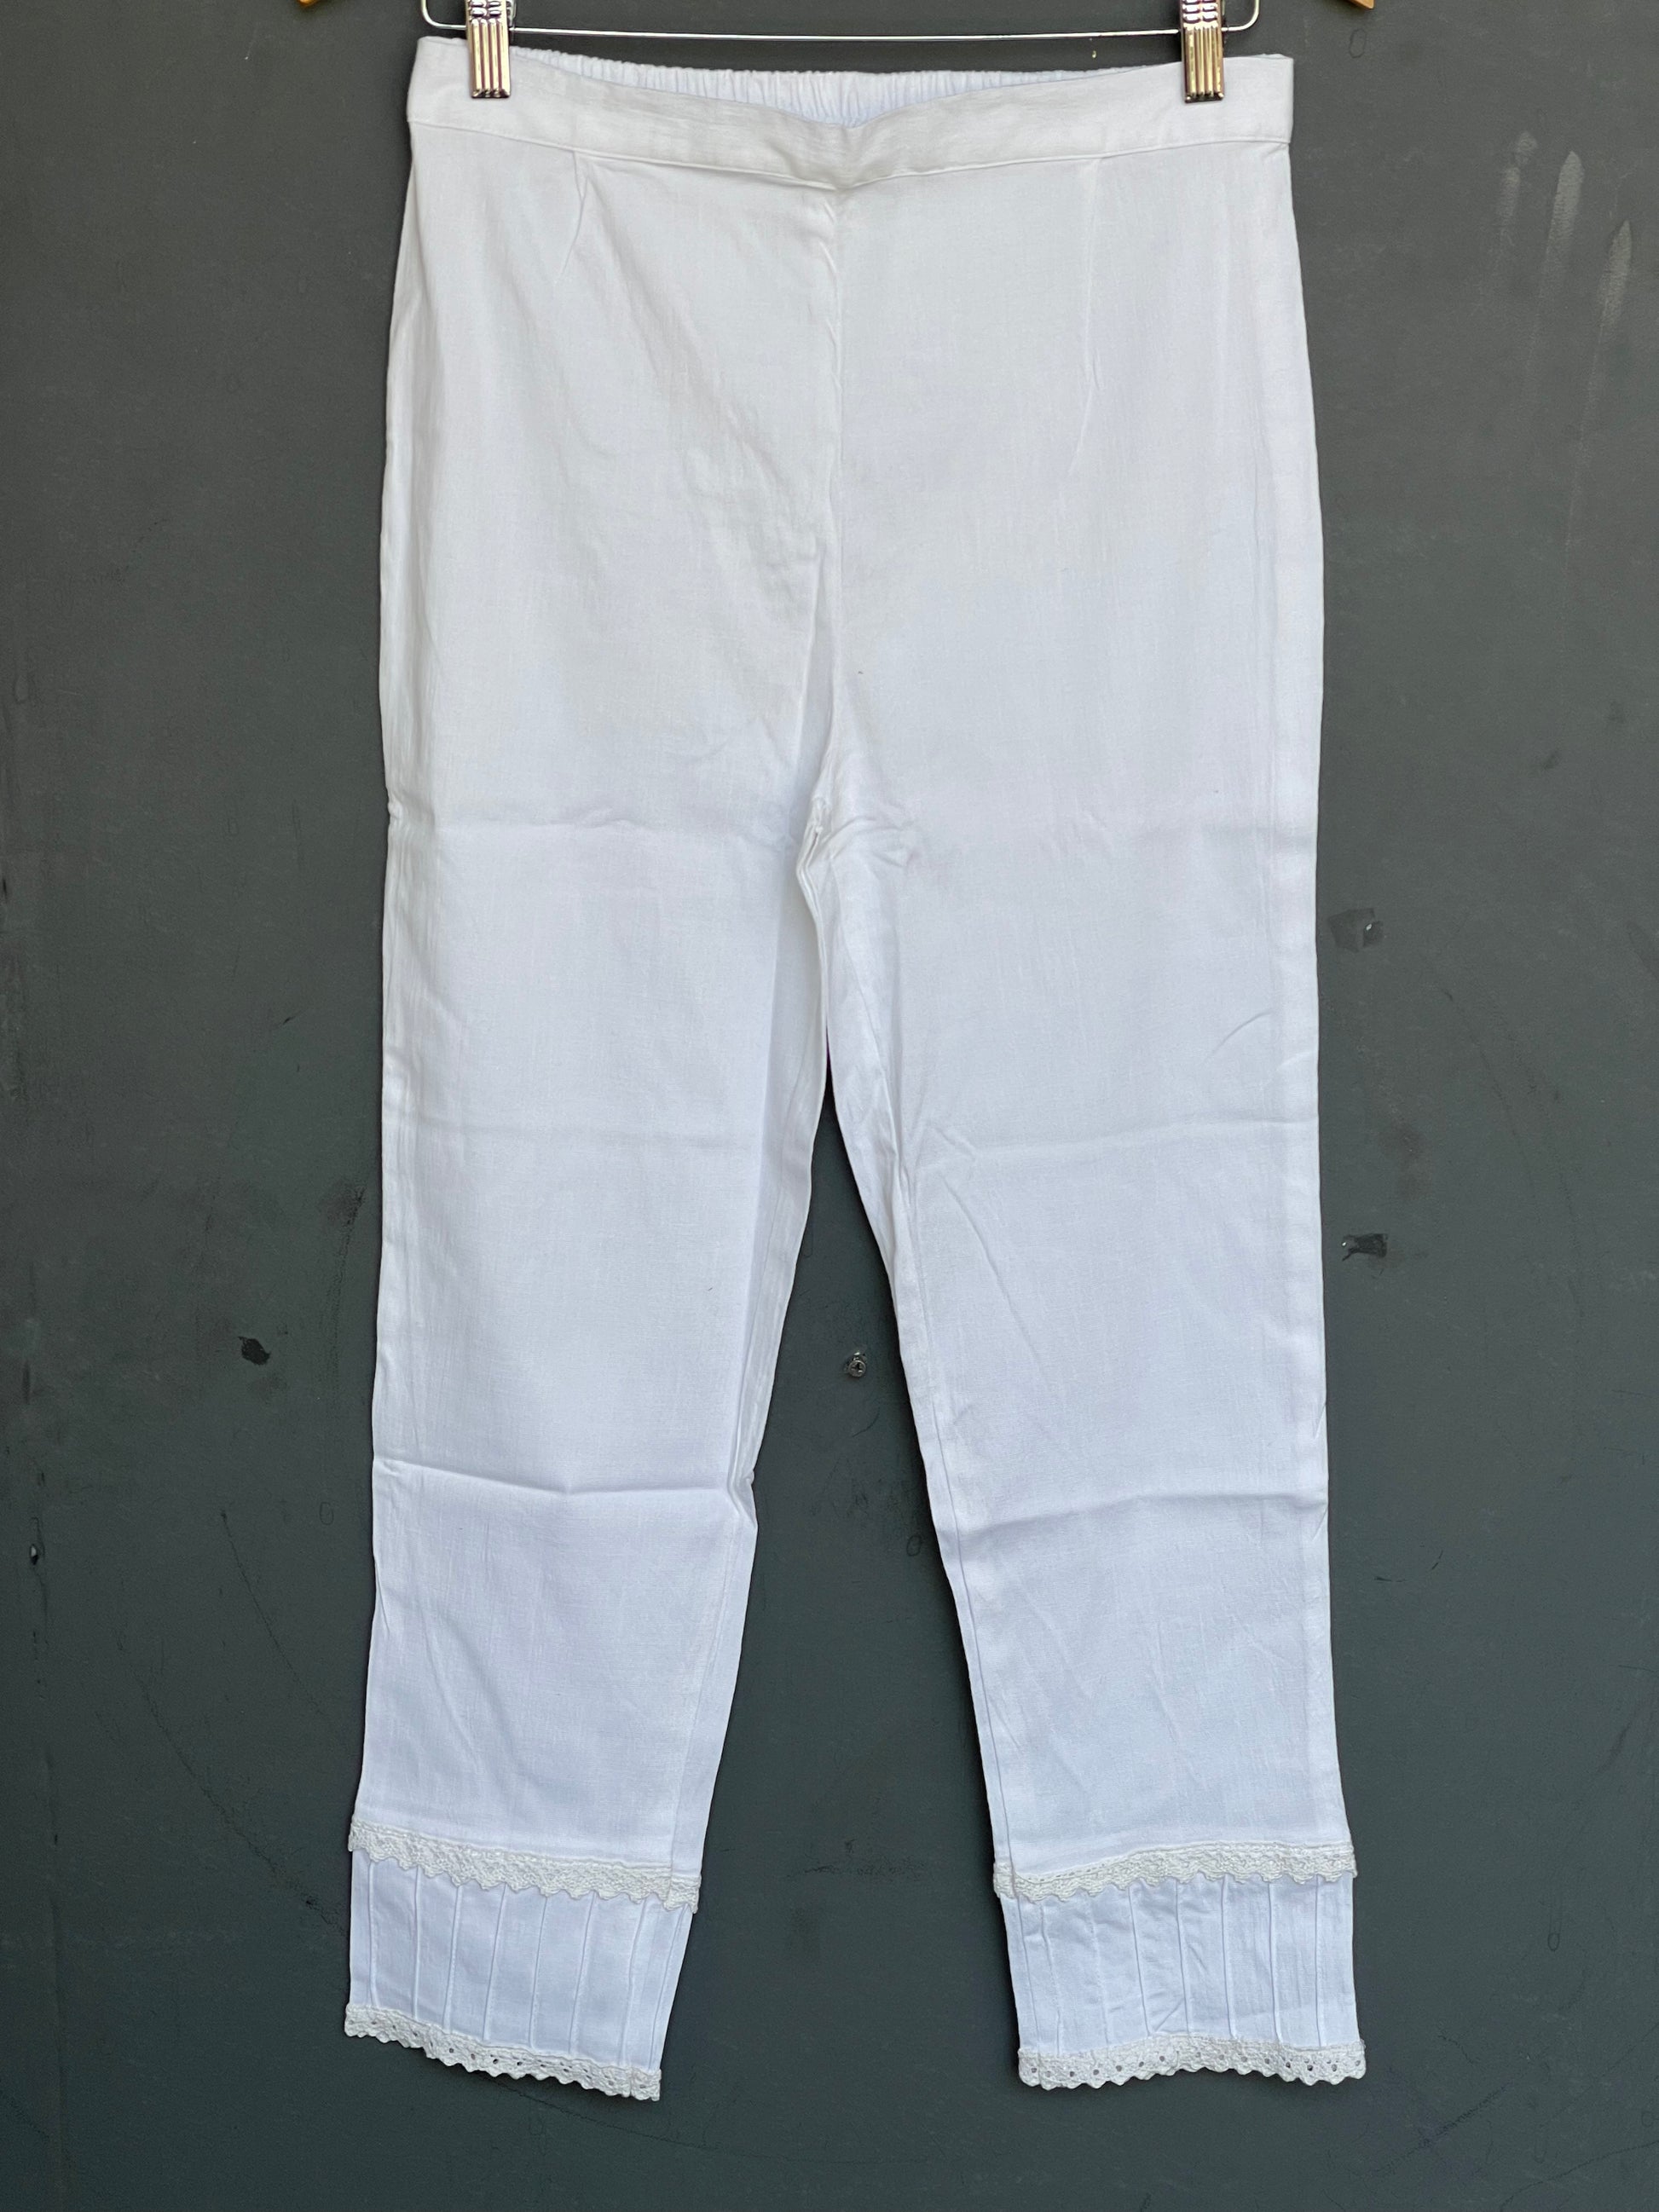 White Cotton Lycra pants with lace and pin-tucks detailing for hem –  Handpicked